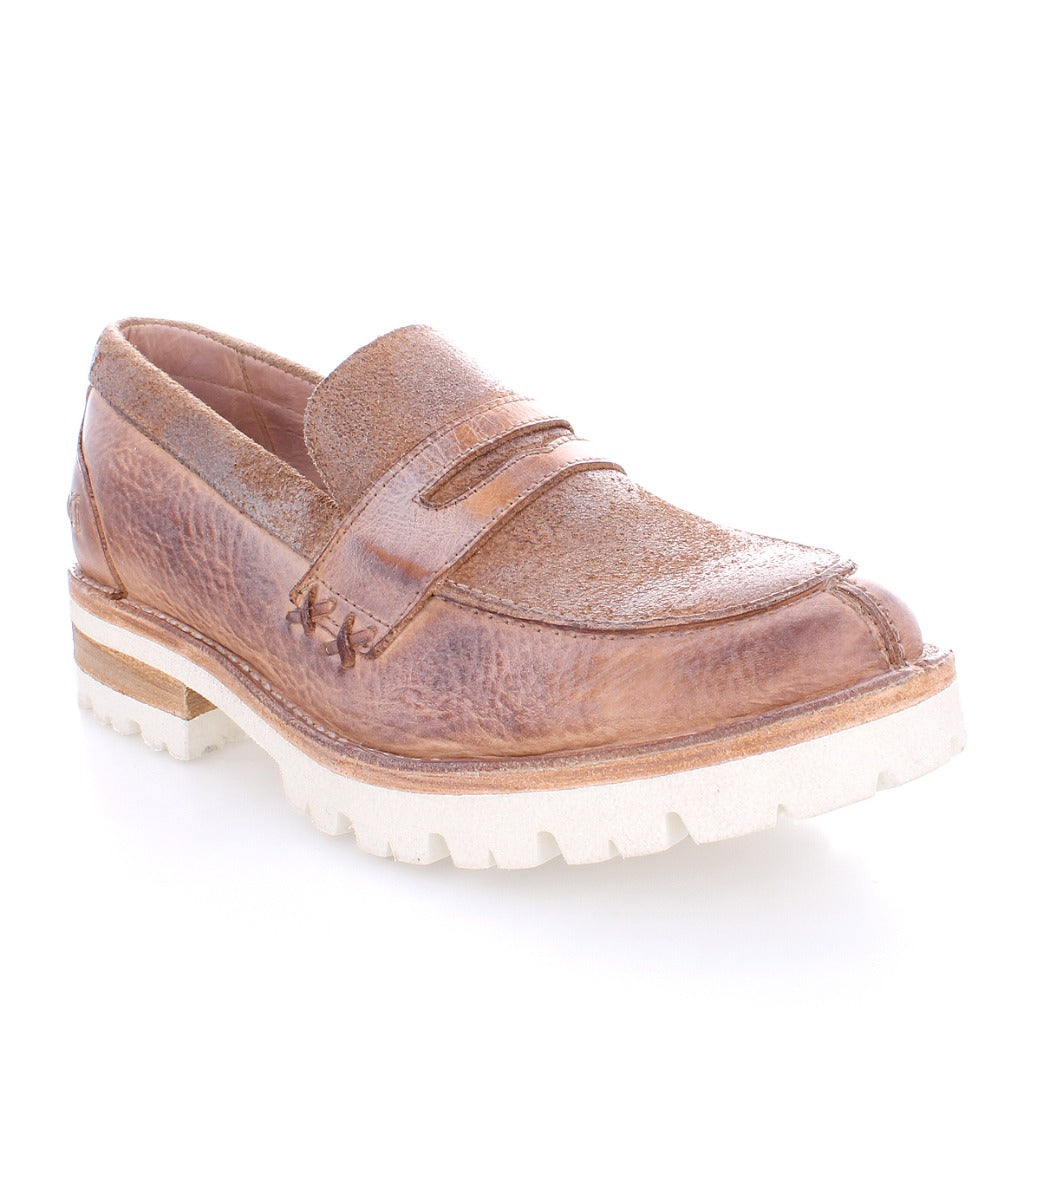 A women's Reina III brown loafer with white outsole by Bed Stu.